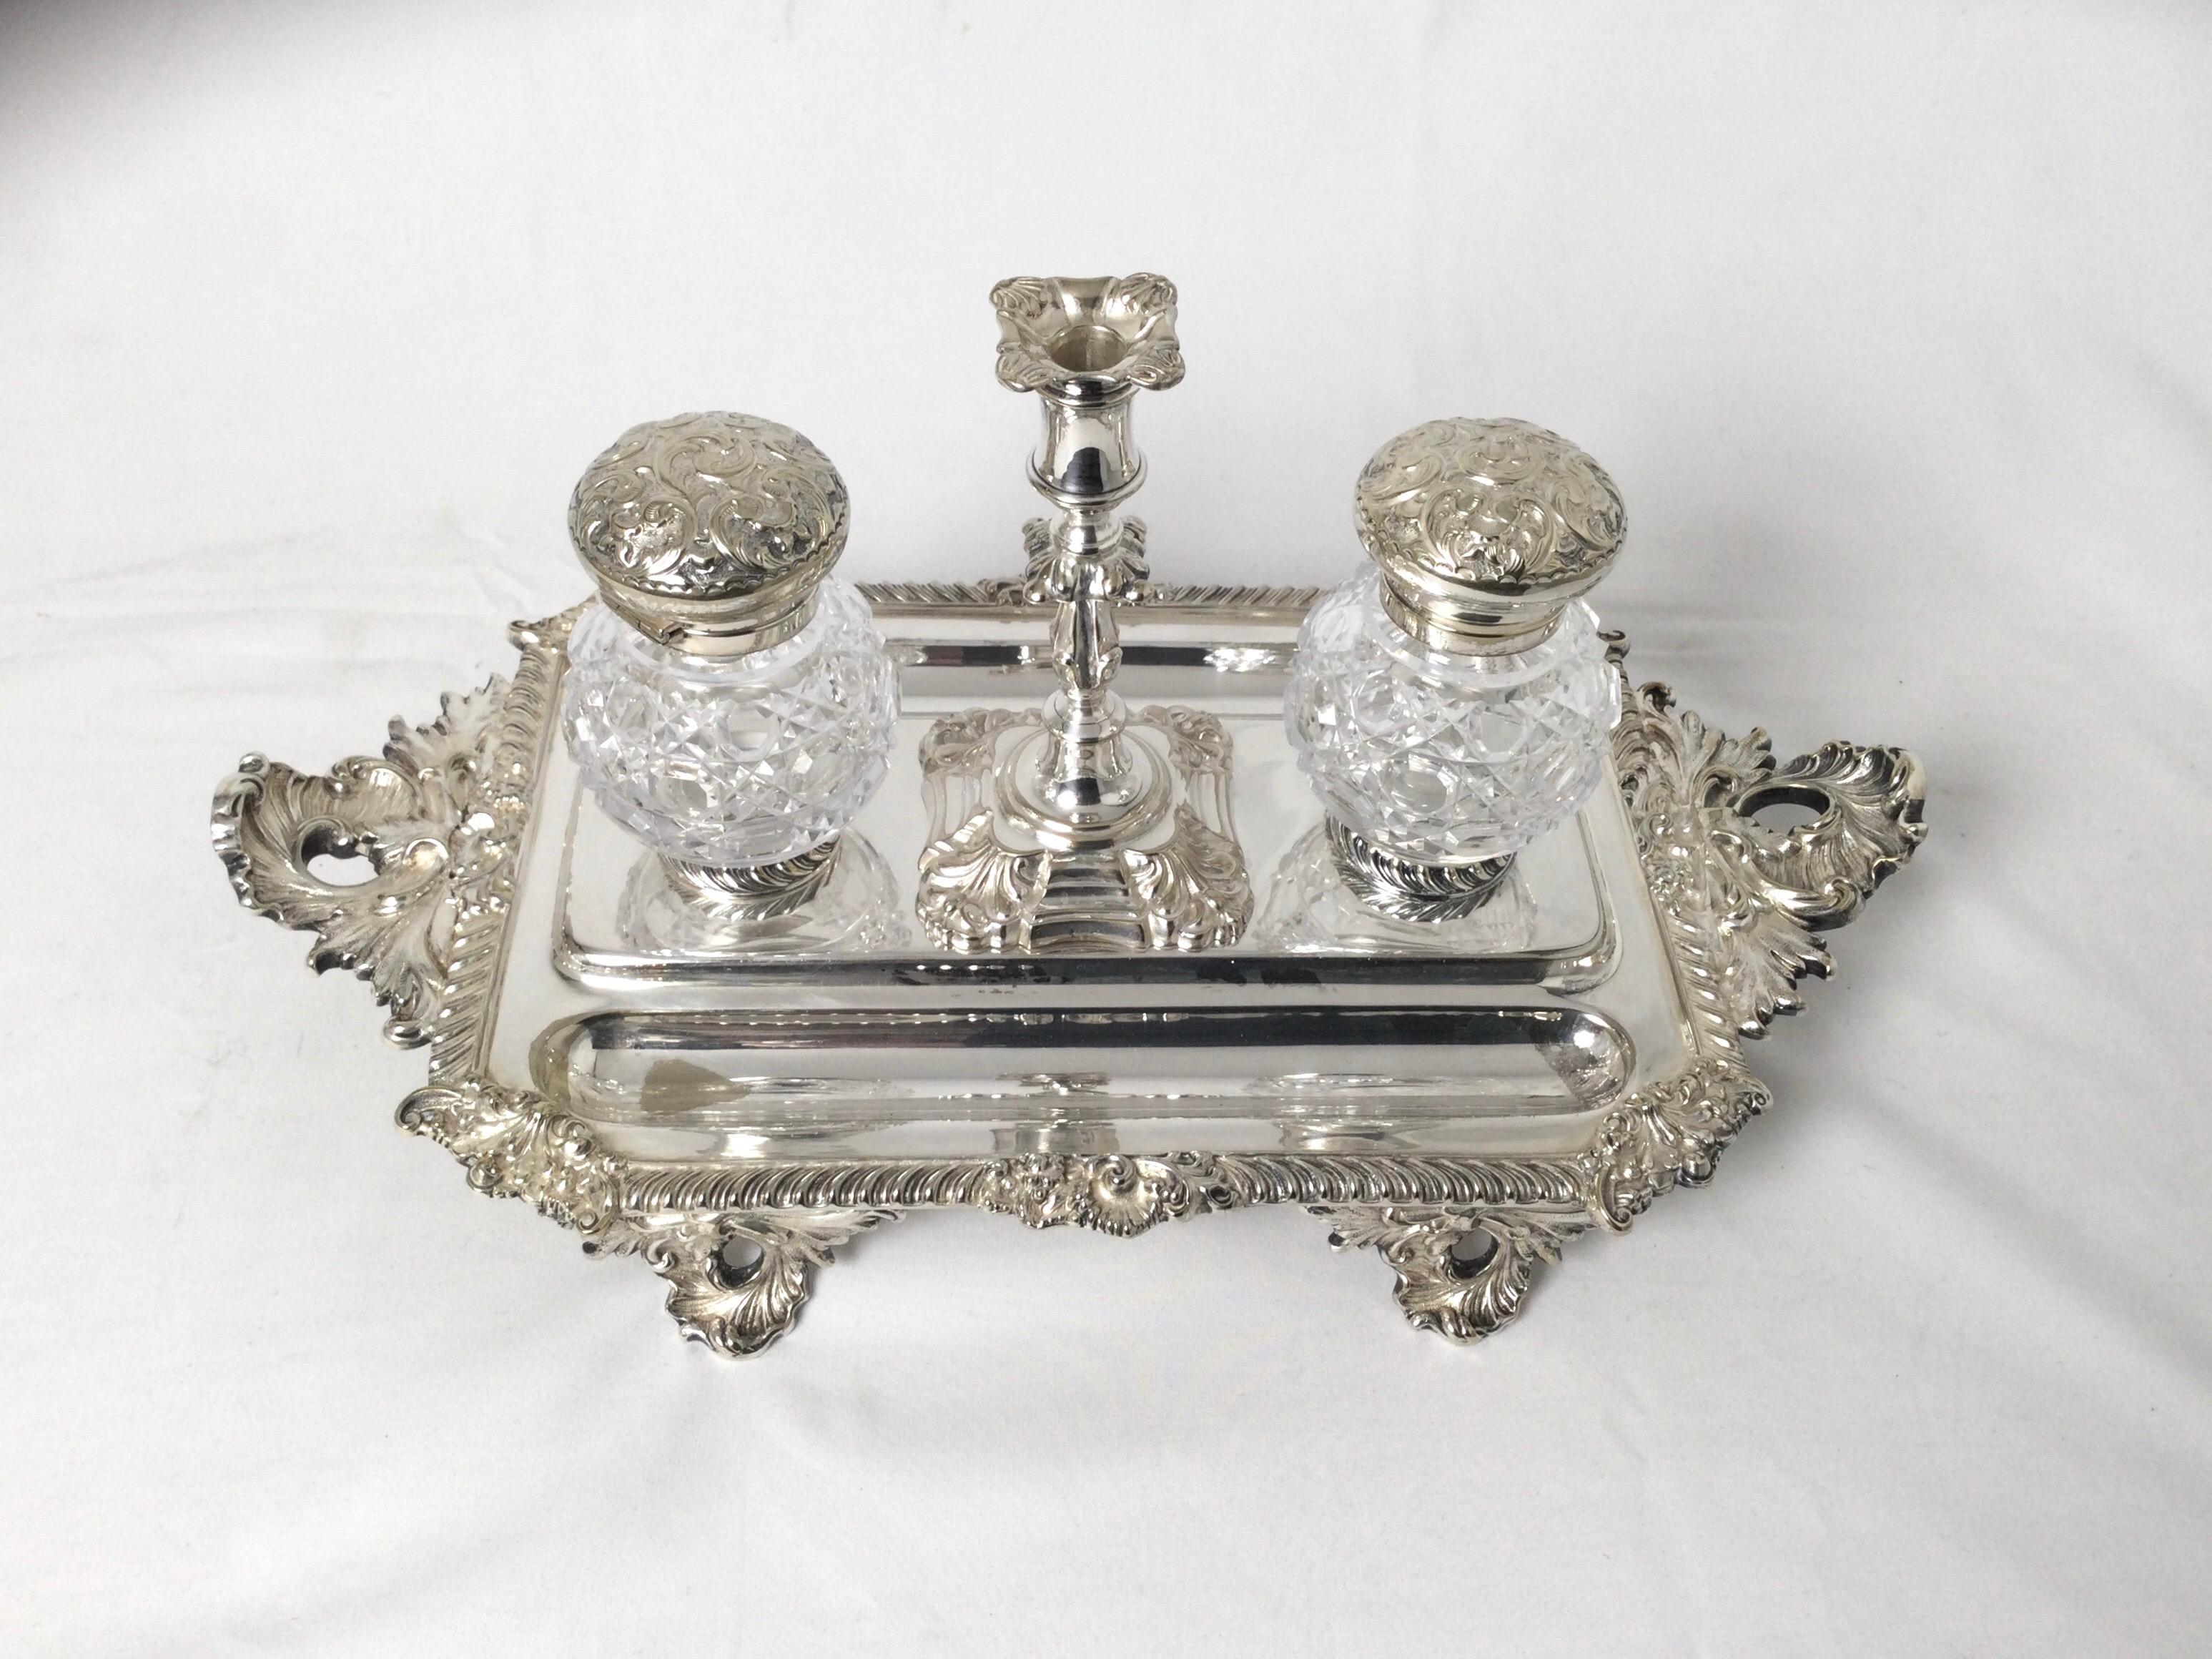 Beautiful Sheffield silver plated and cut glass double inkwell. The cut glass round inkwells with a Russian pattern with repousse hinged lids fit neatly onto the base which has a miniature candlestick with original bobeche.